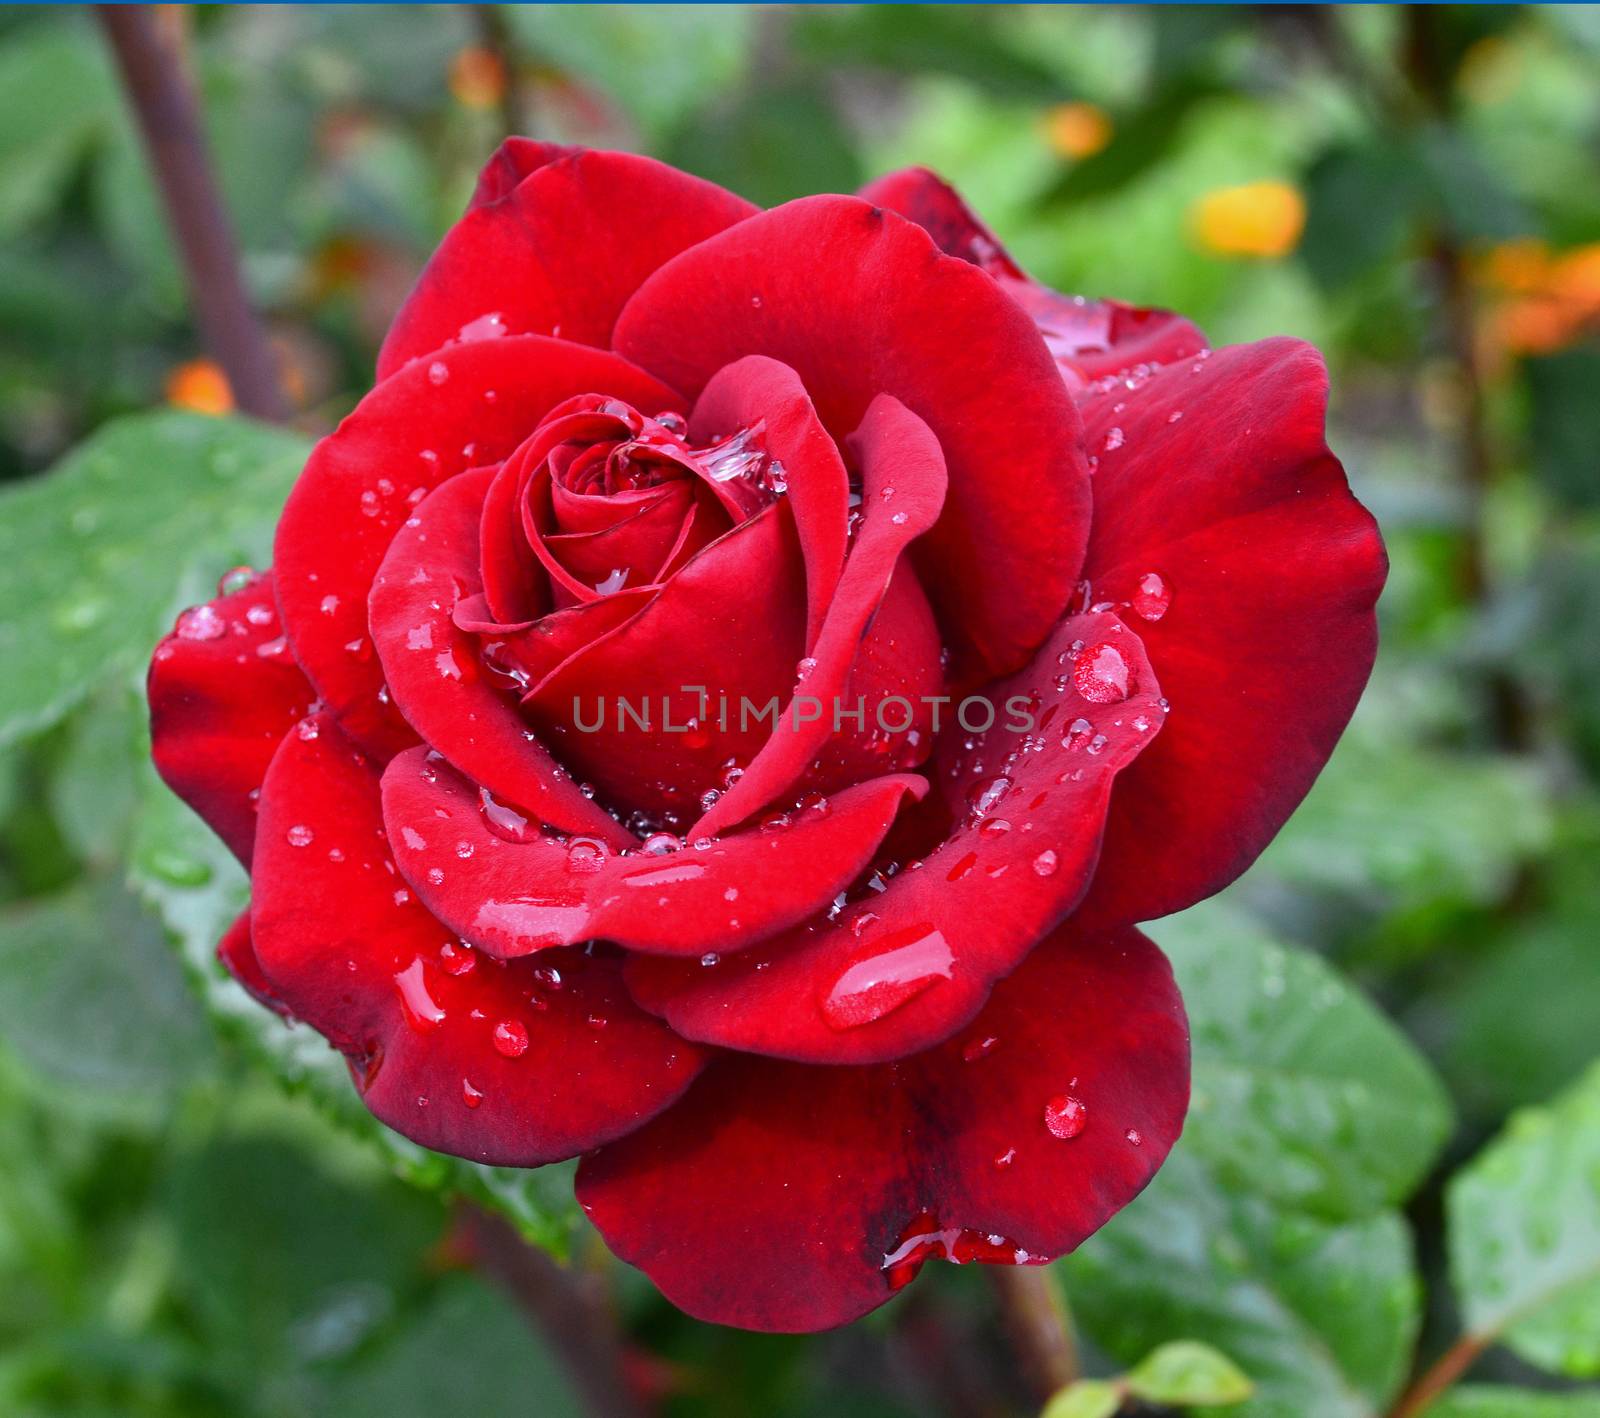 Red rose with water drops on petals in a garden